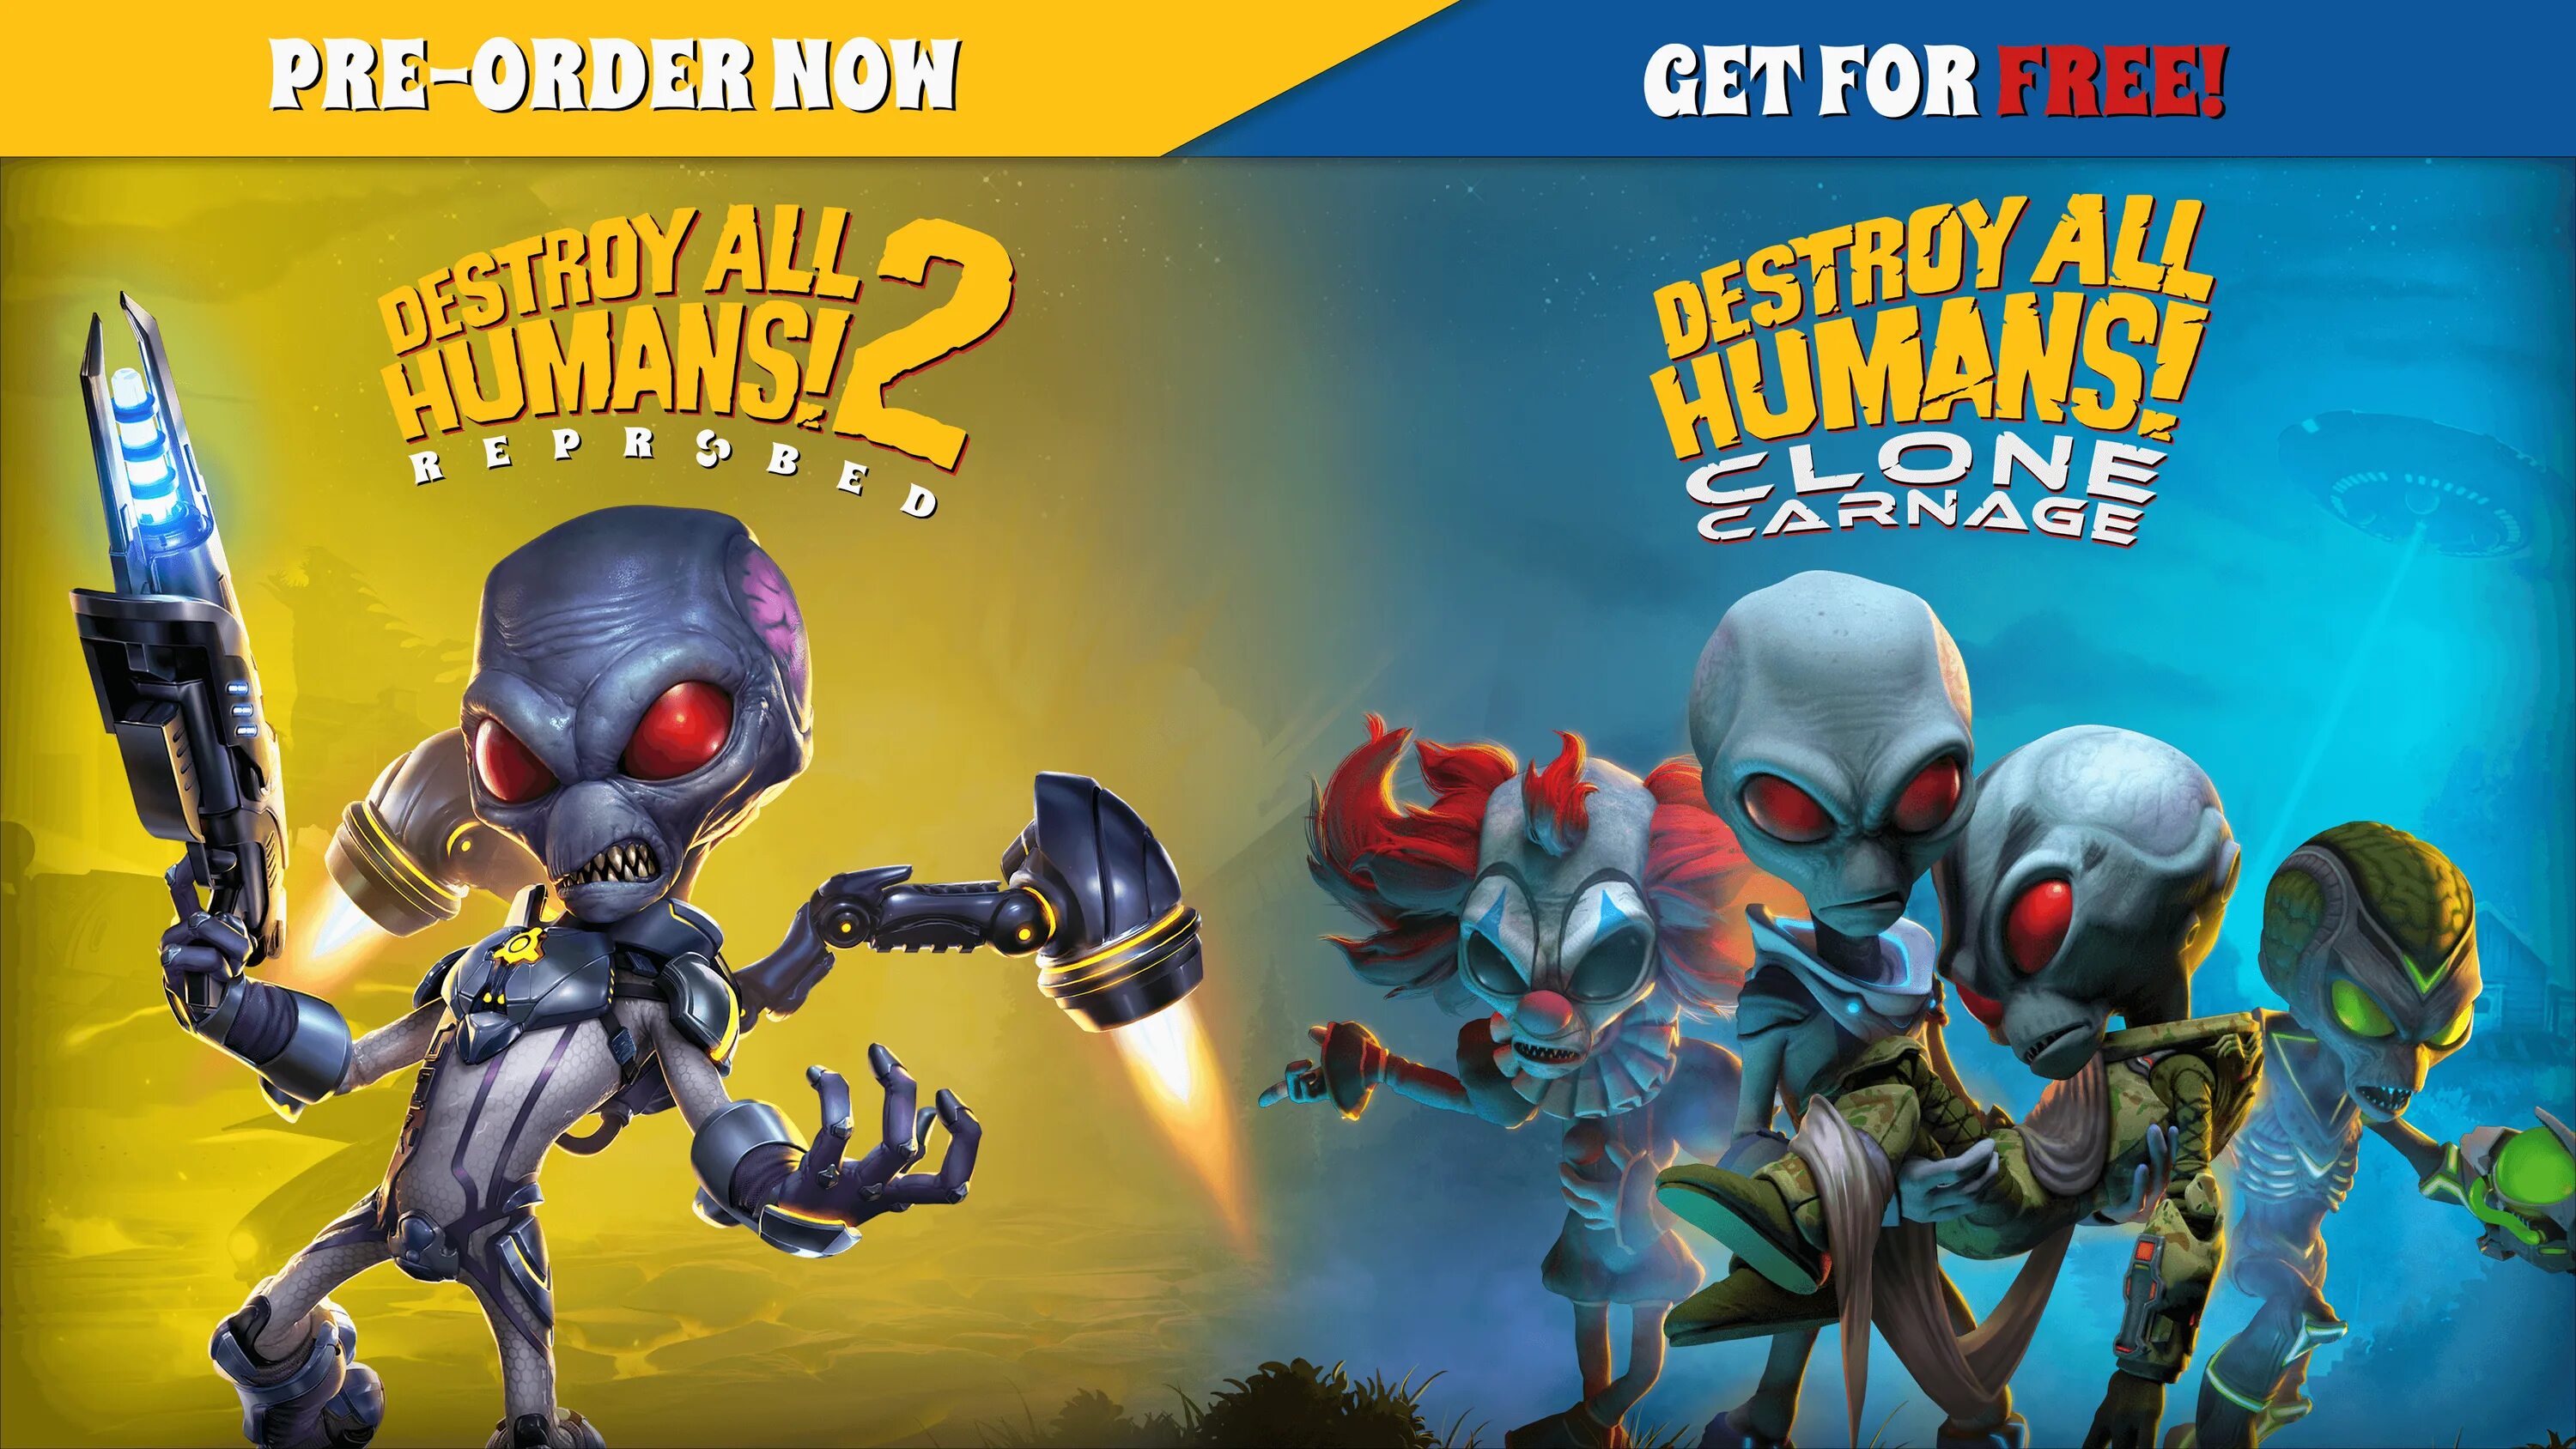 Destroy all Humans 2 reprobed. Destroy all Humans!. Крипто destroy all Humans. Игра destroy all Humans! 2 Reprobed.